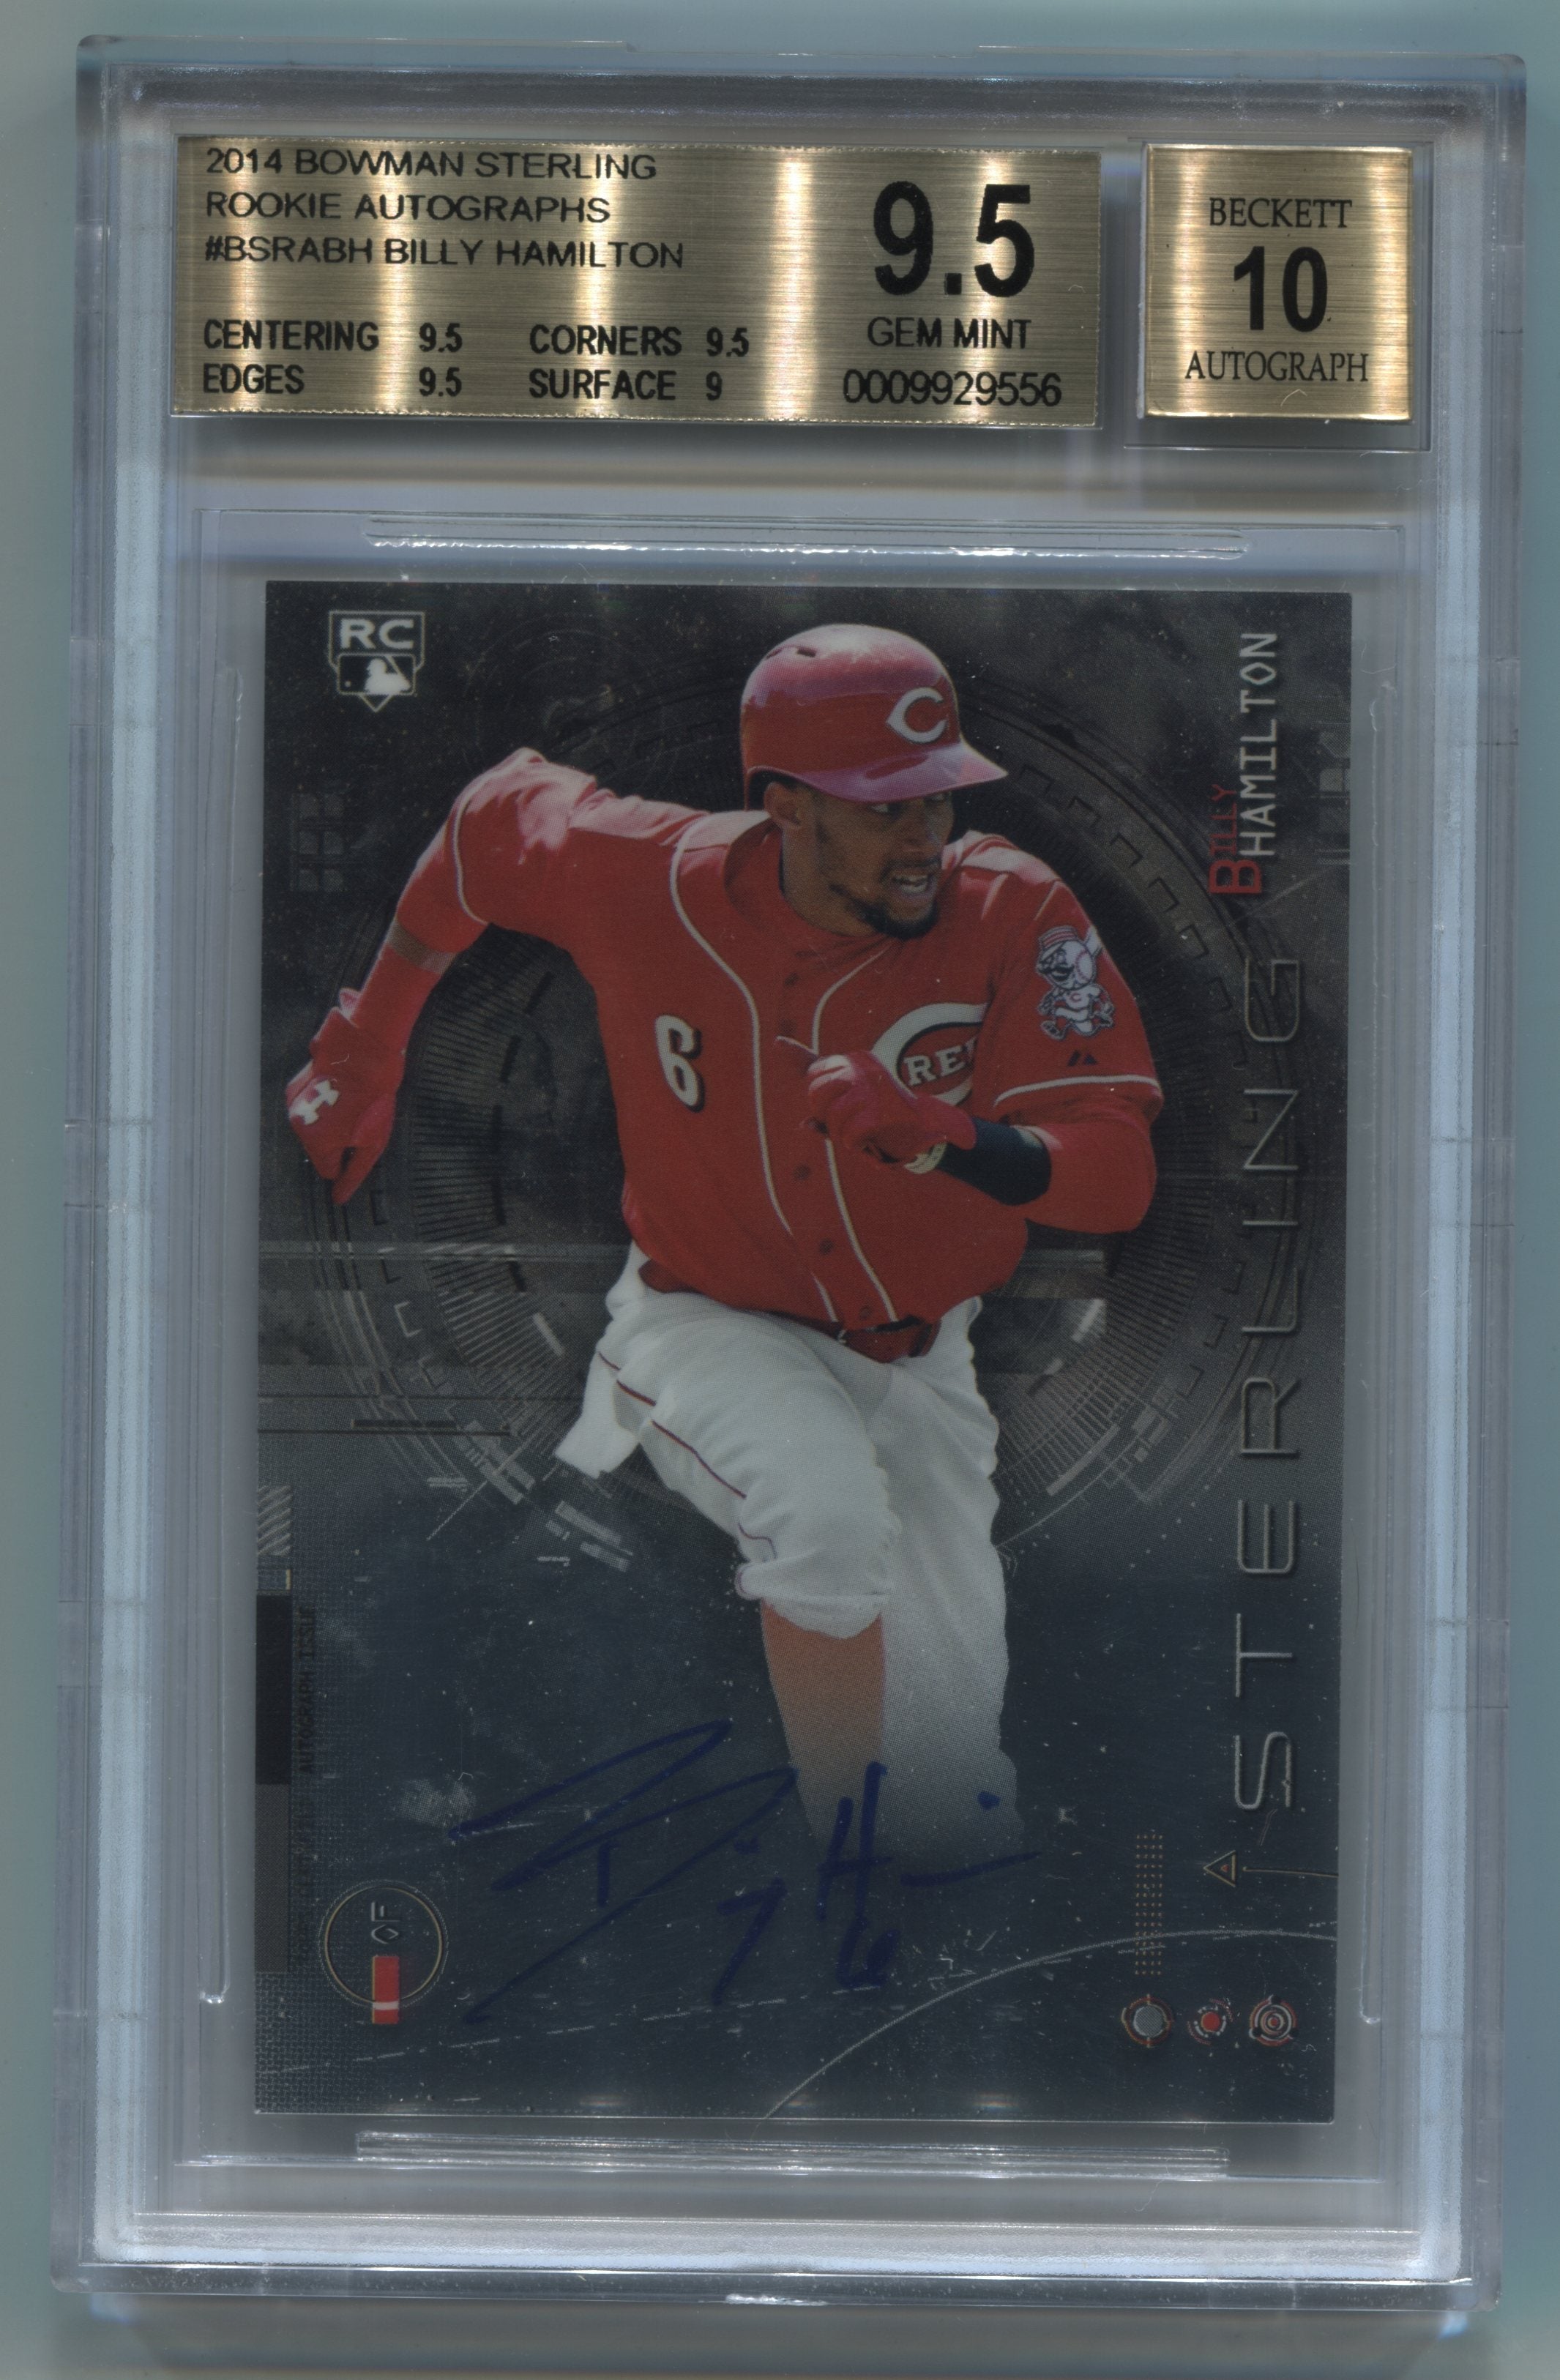 2014 Bowman Sterling Rookie Autographs #BSRABH Billy Hamilton BGS 9.5/10 | Eastridge Sports Cards